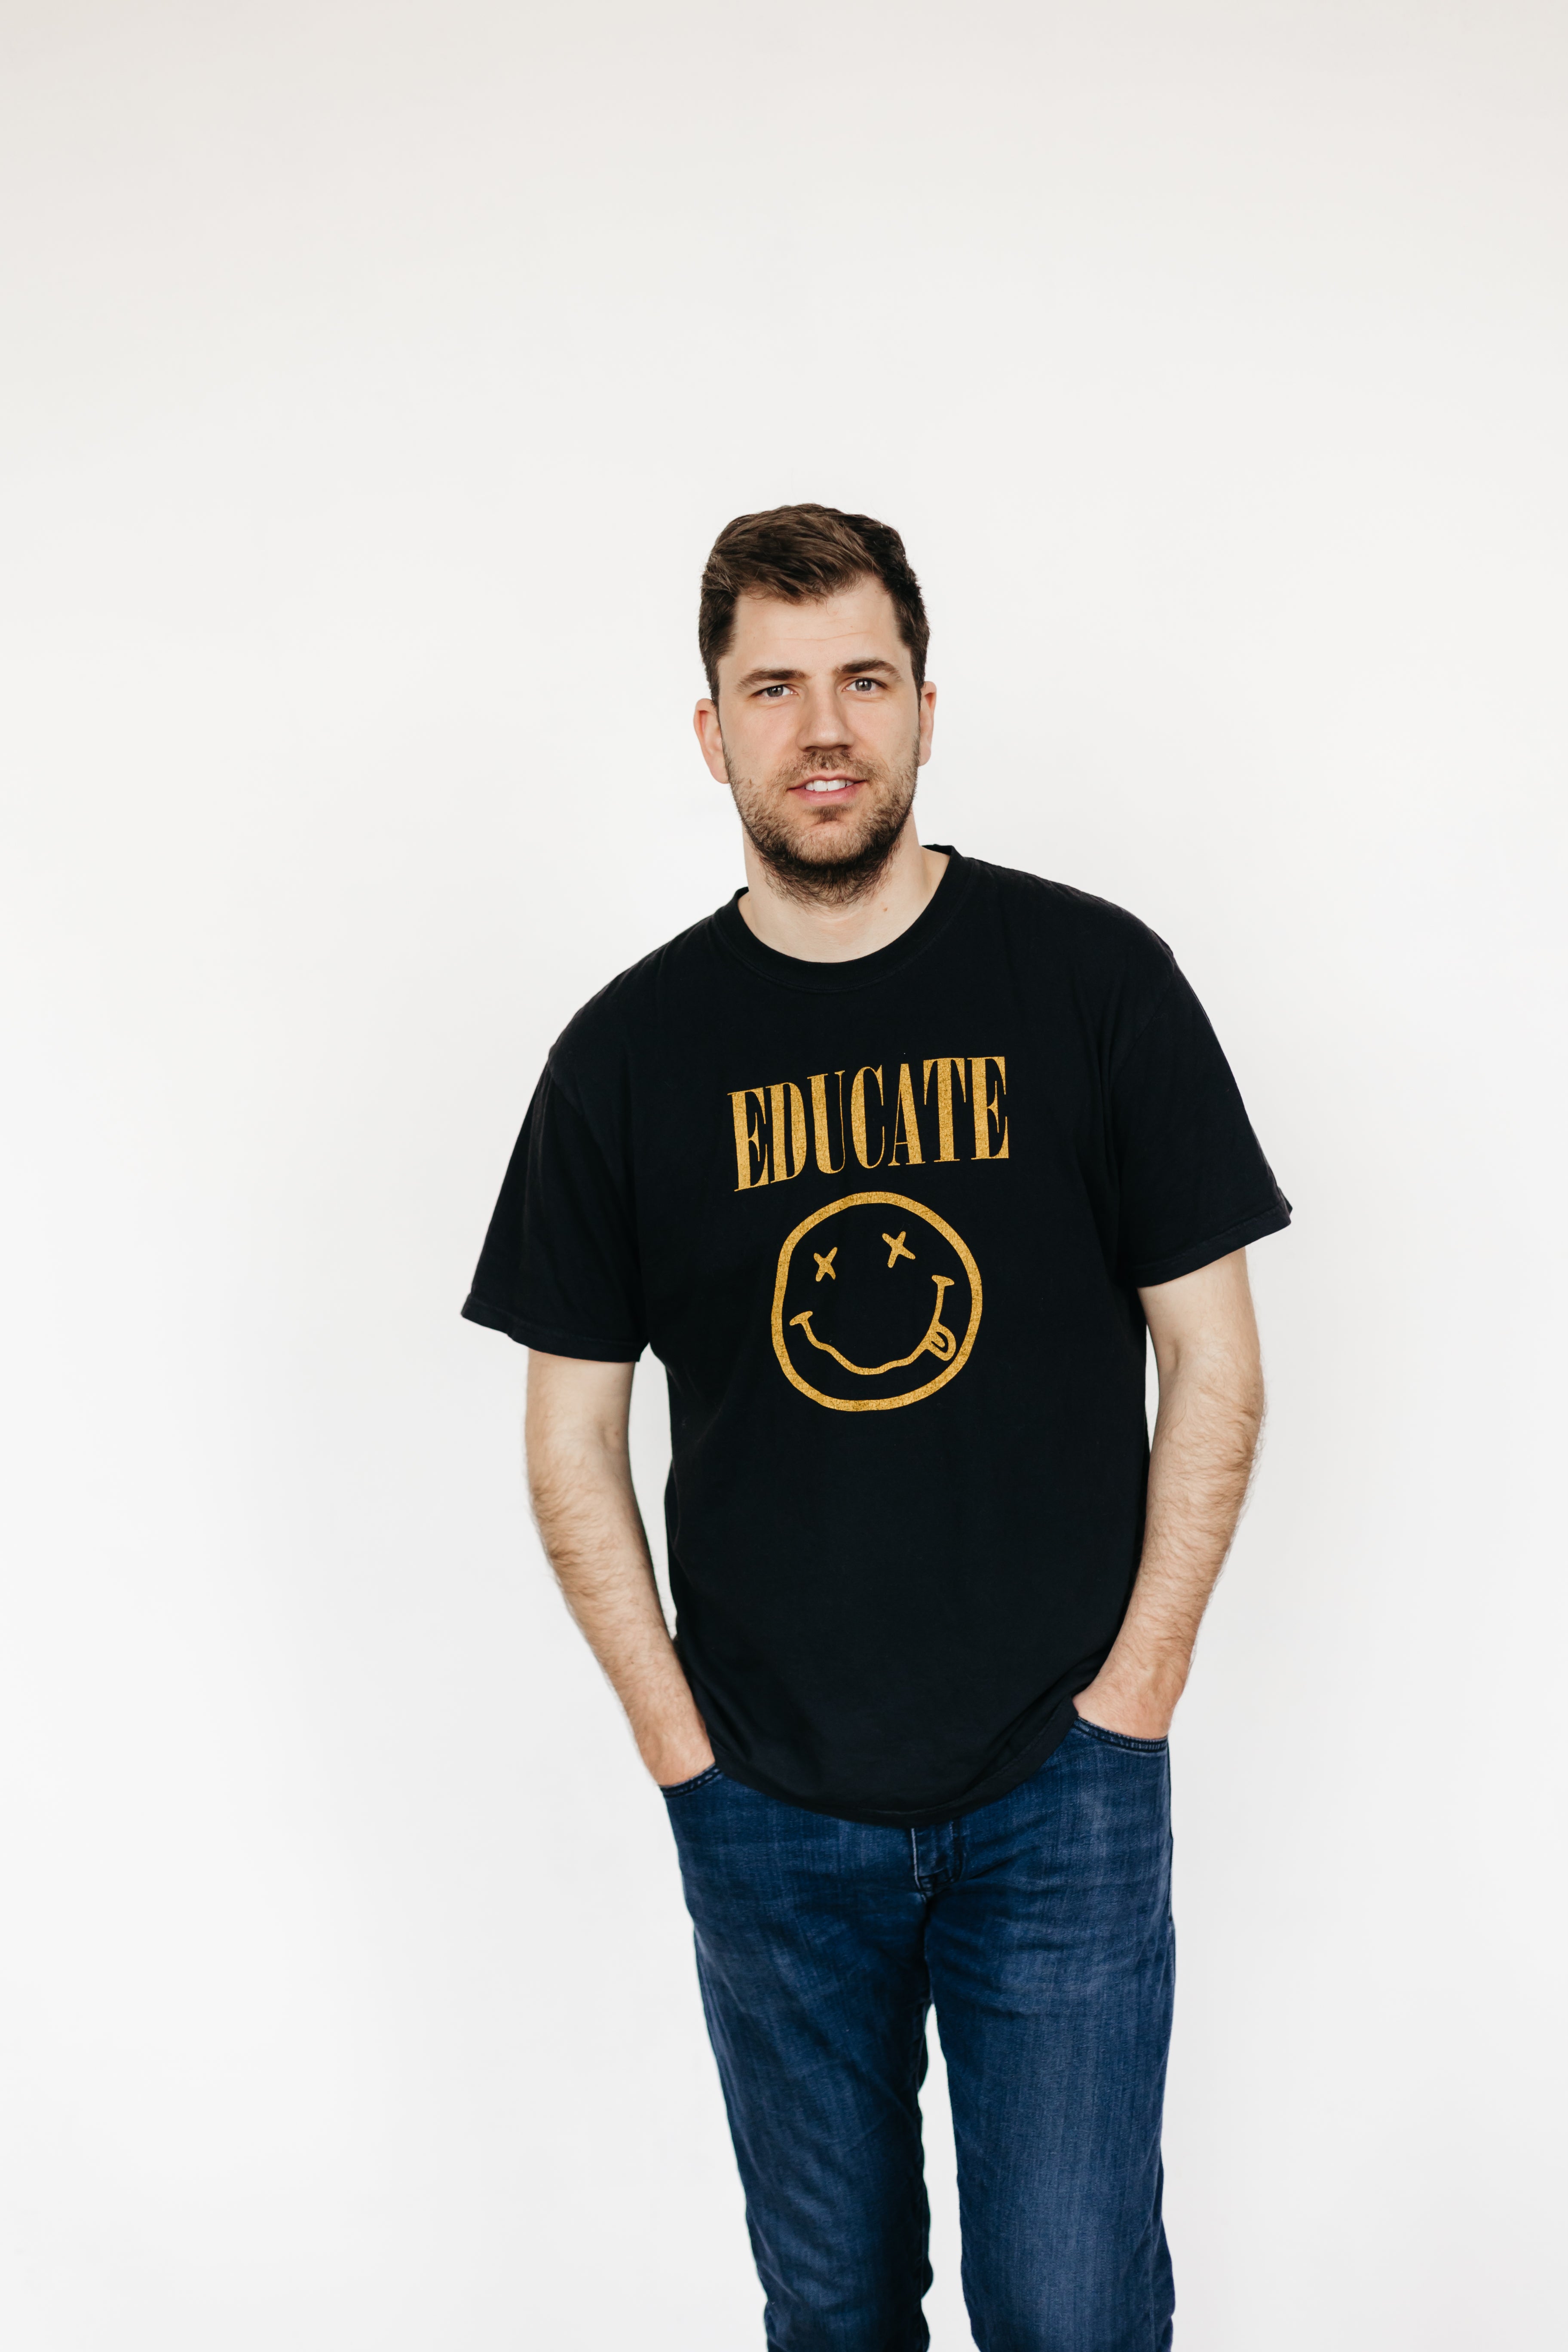 Educate Smiley Face Tee